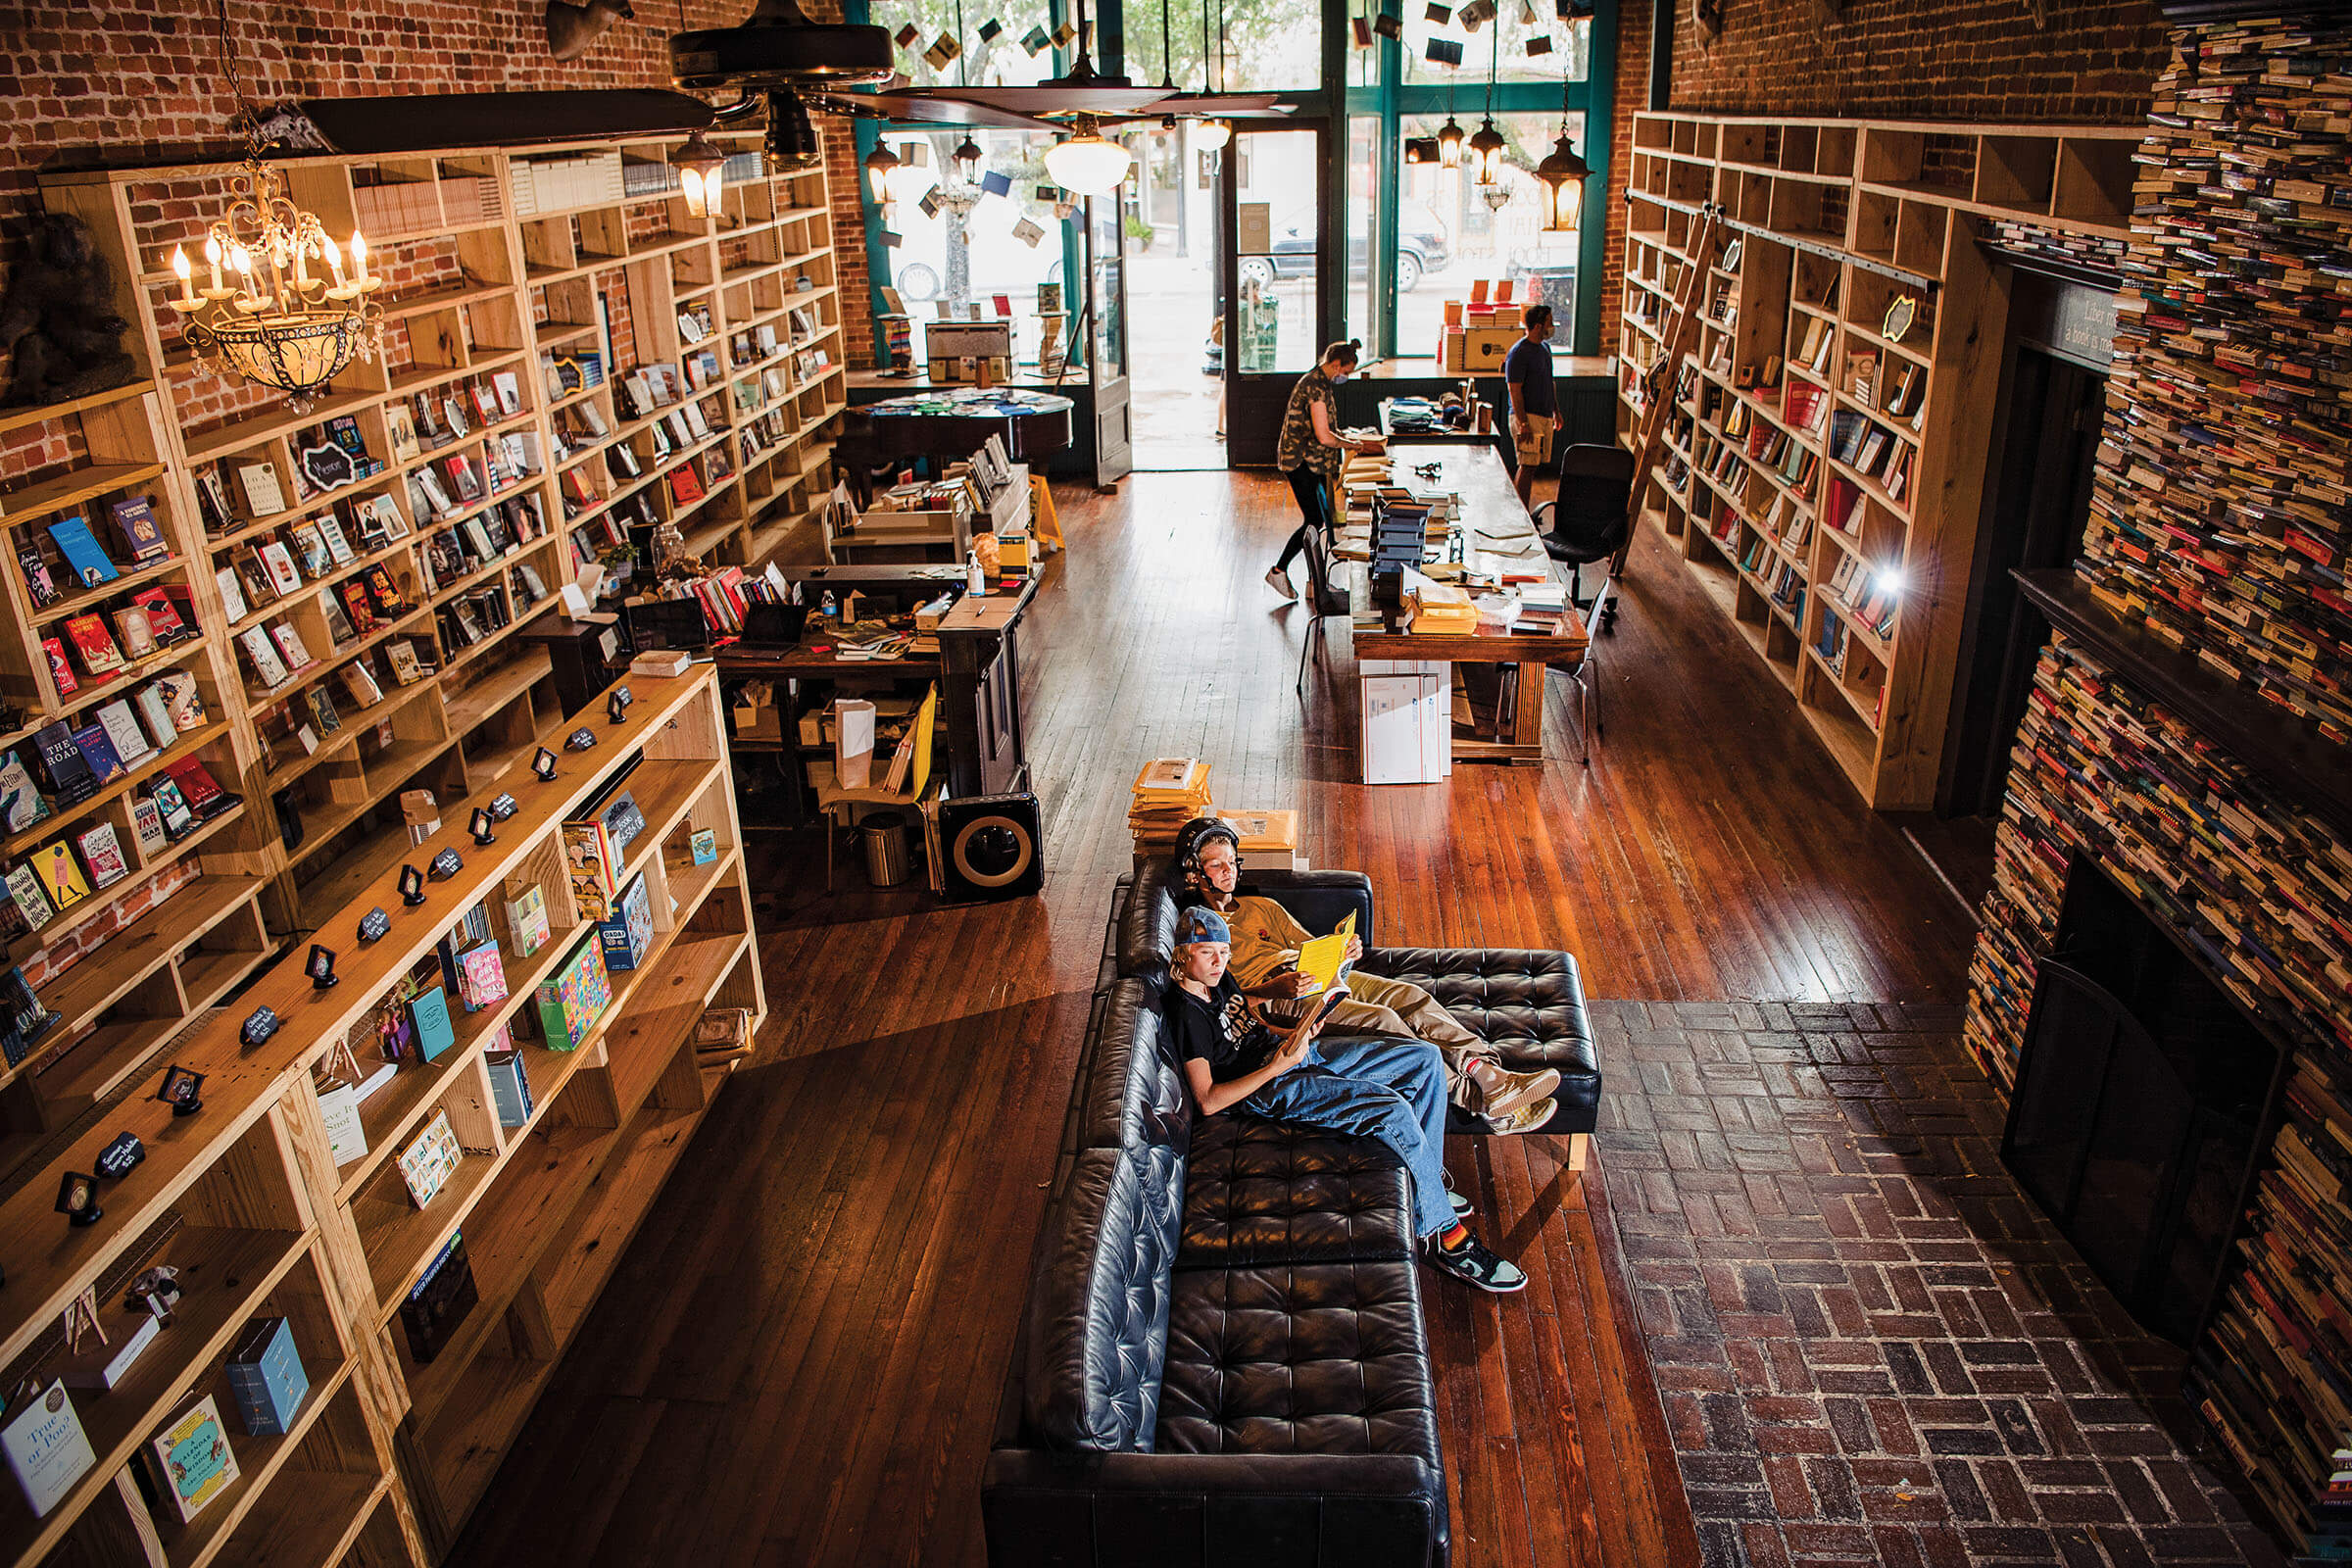 People sit on a large leather couch surrounded by books in a wood-paneled and brick bookstore